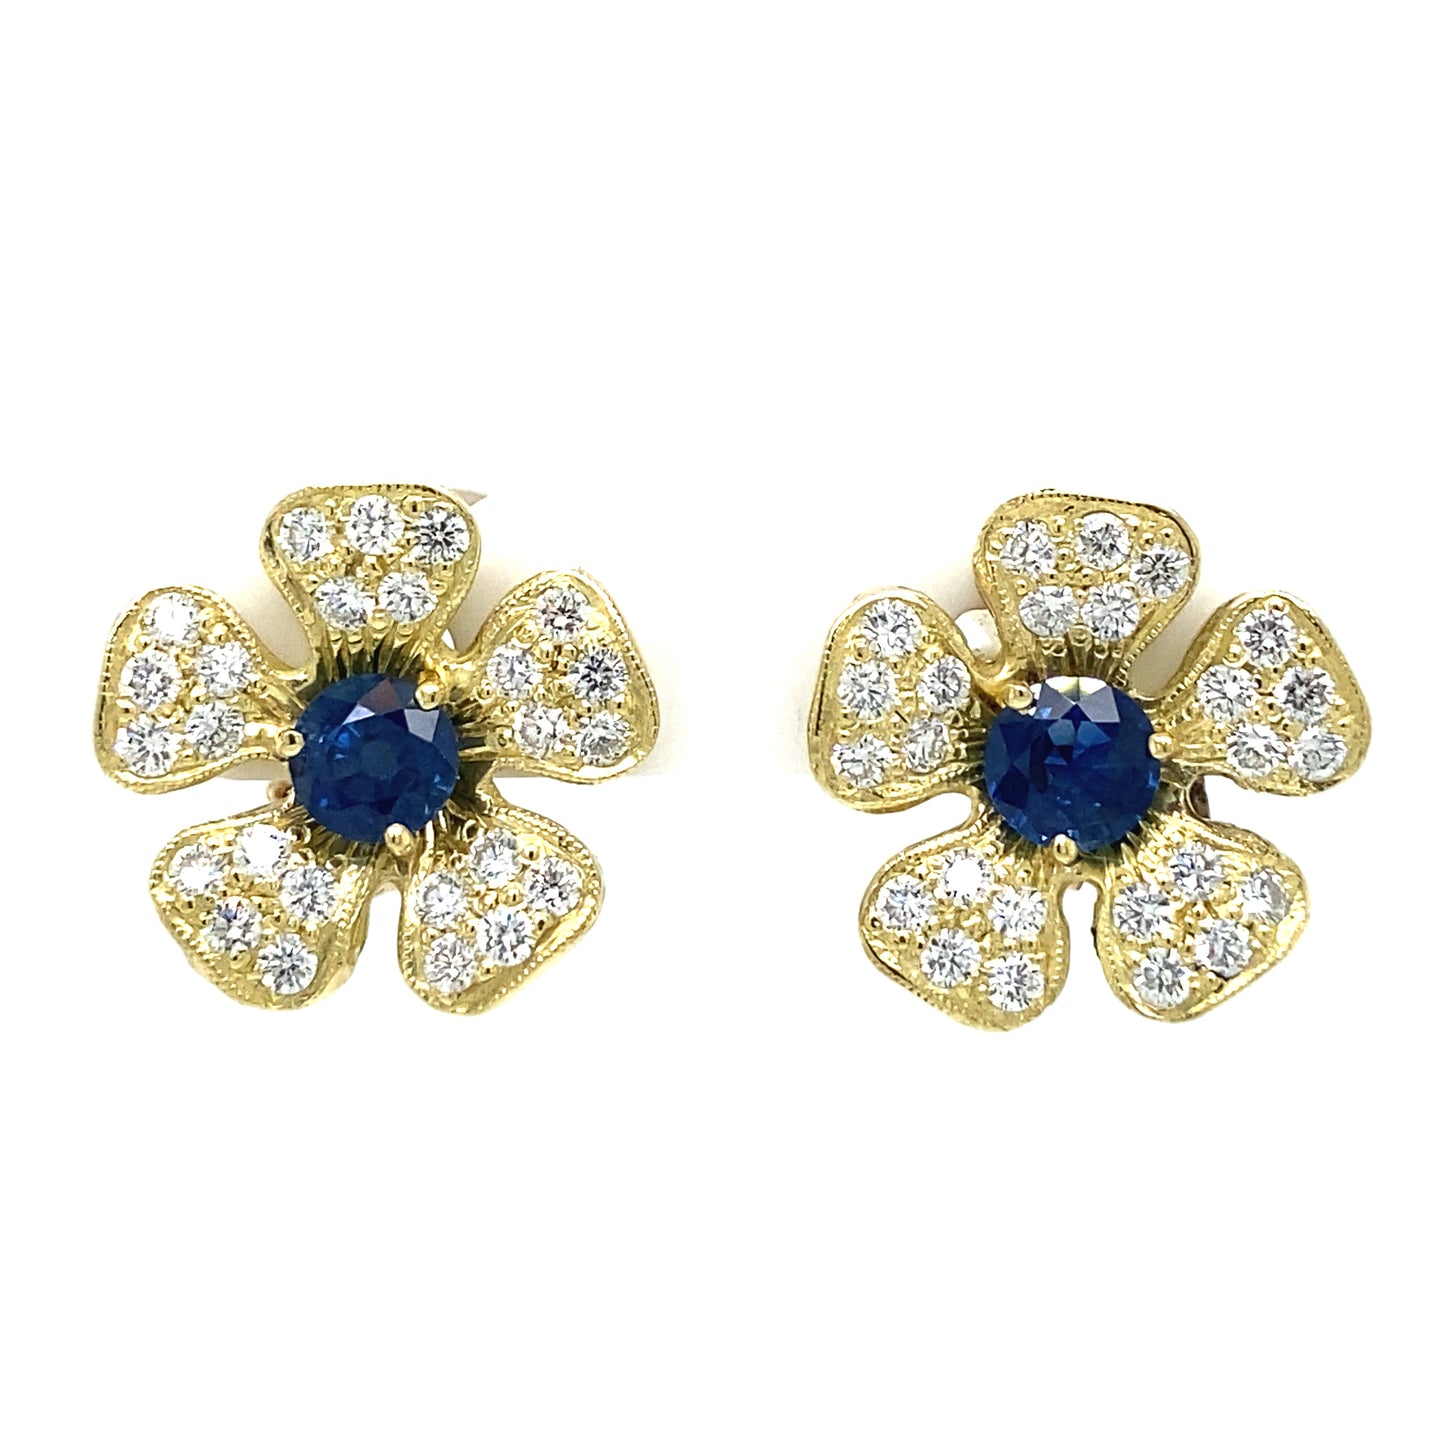 Floral Blue Sapphire Earrings in 18K Yellow Gold